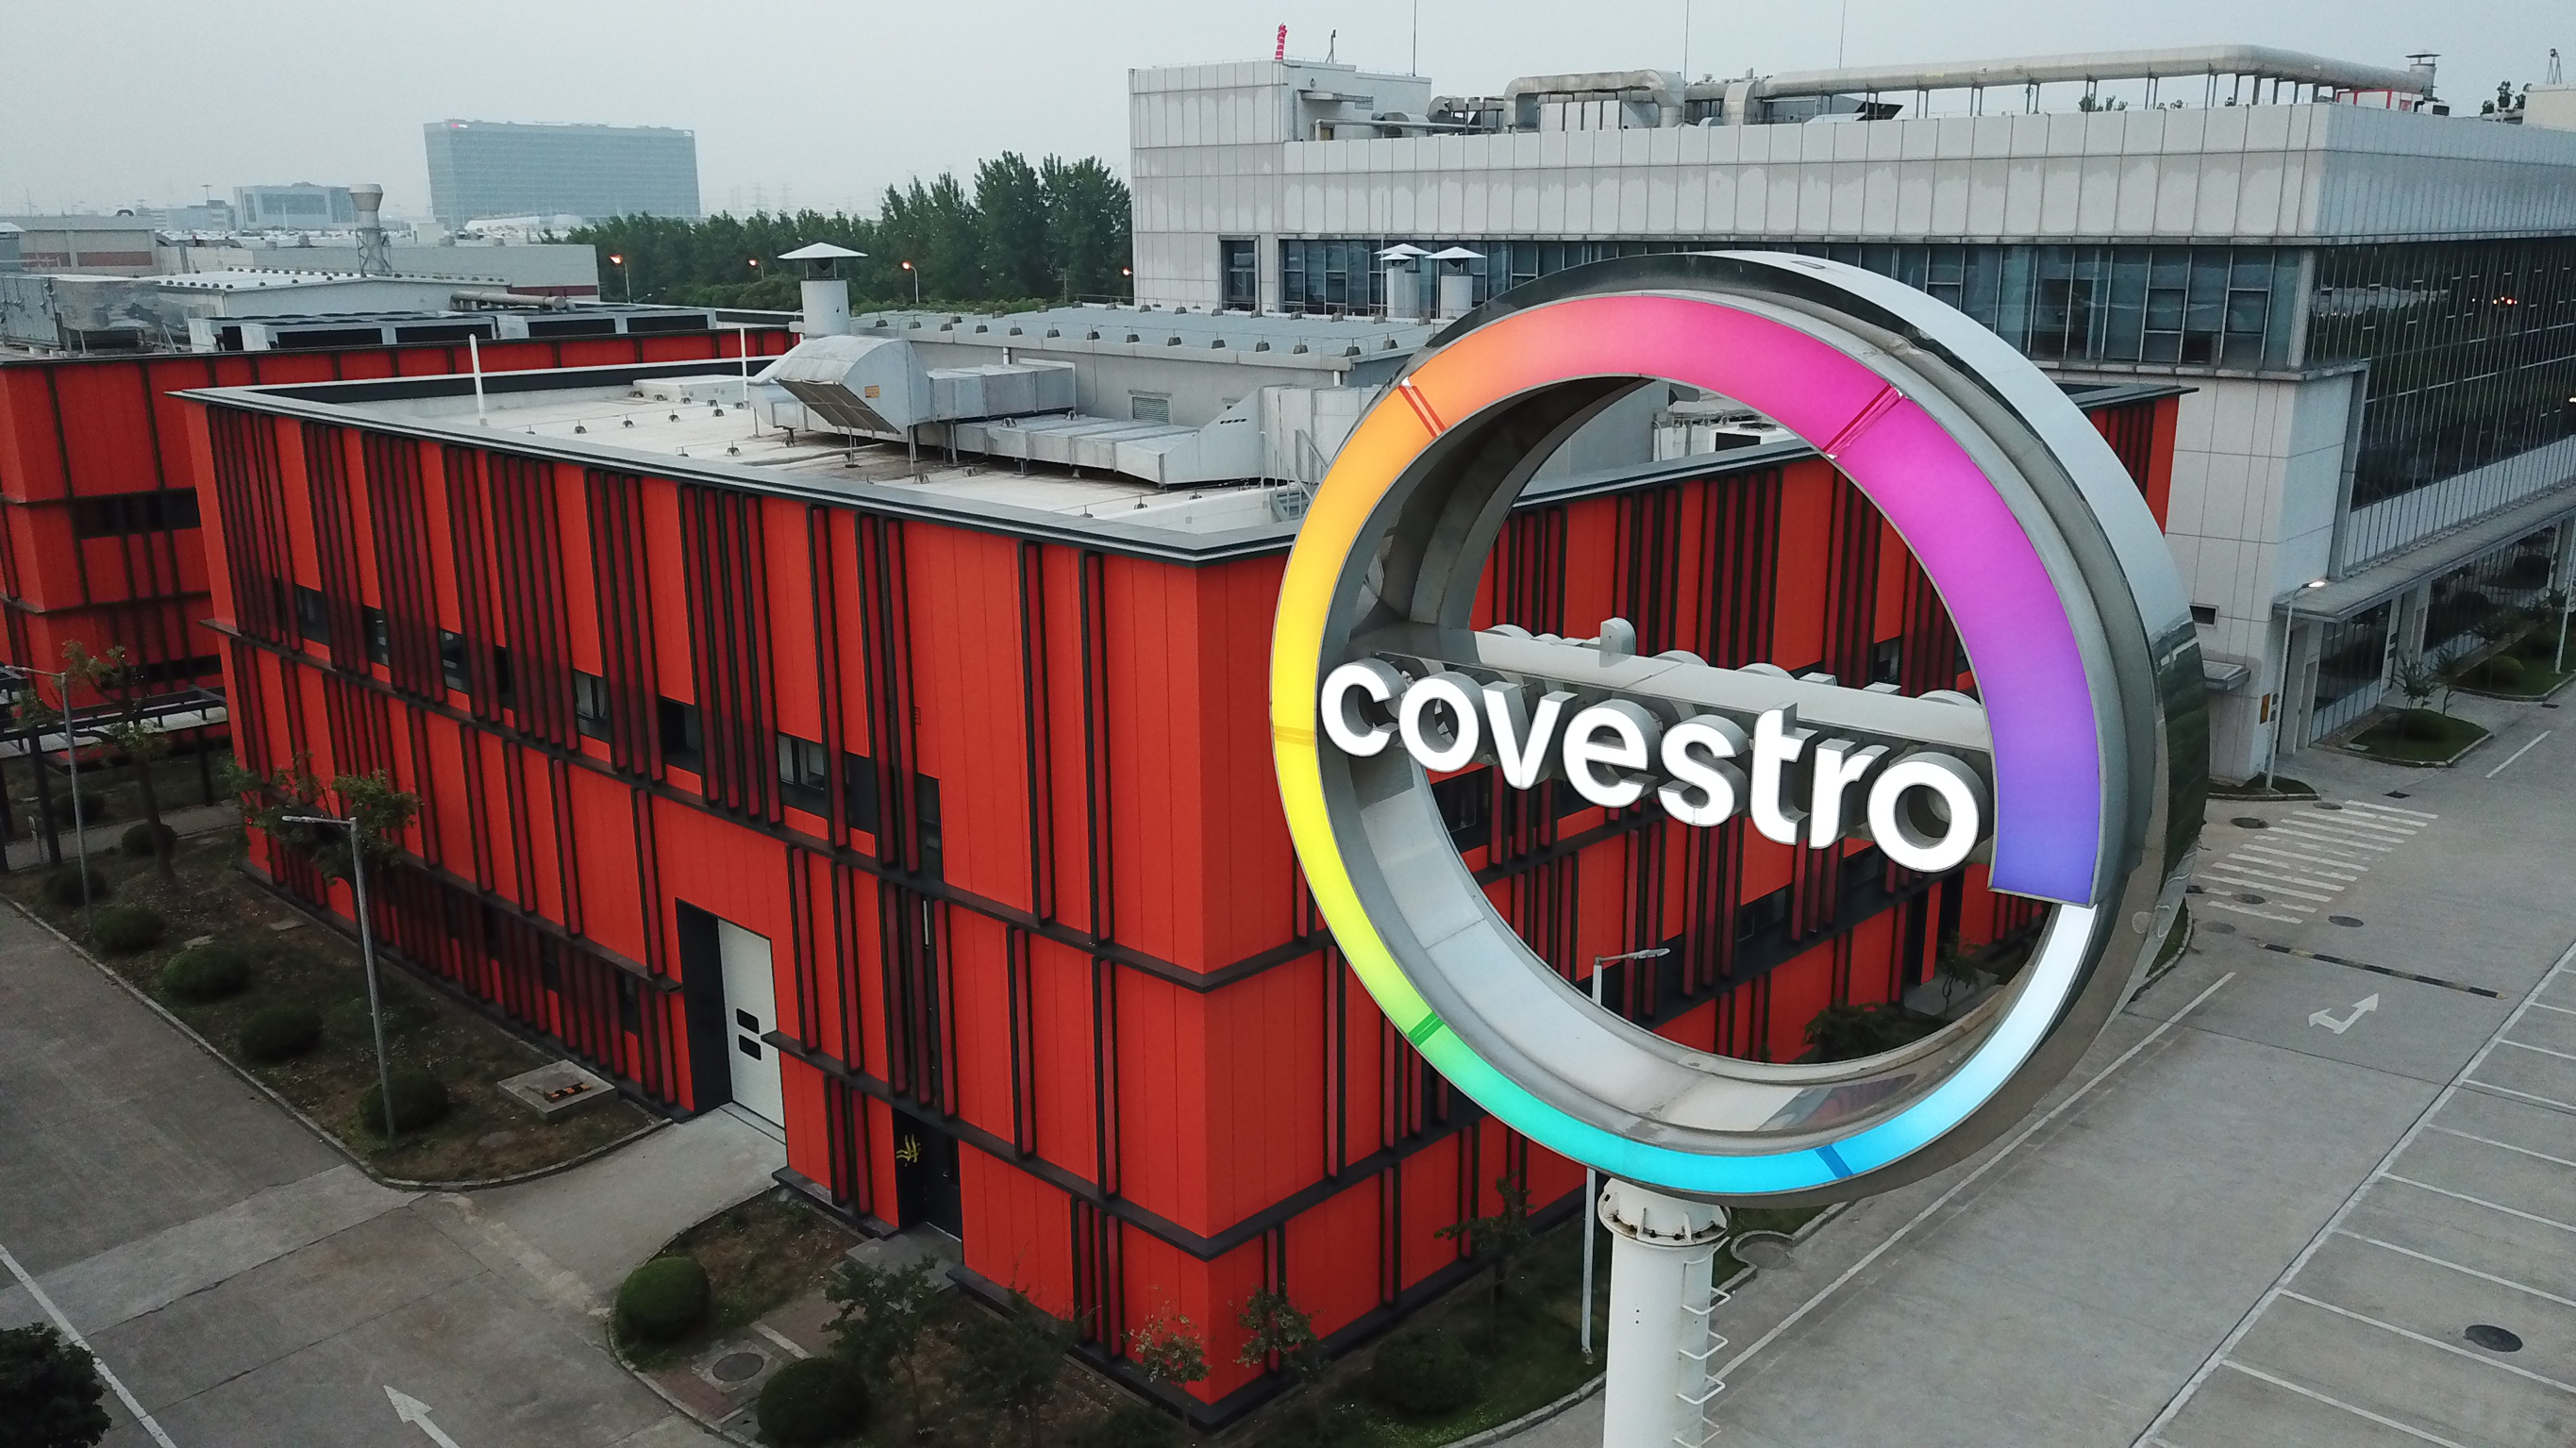 Covestro says that it is focusing on the Chinese market in developing a range of its products.